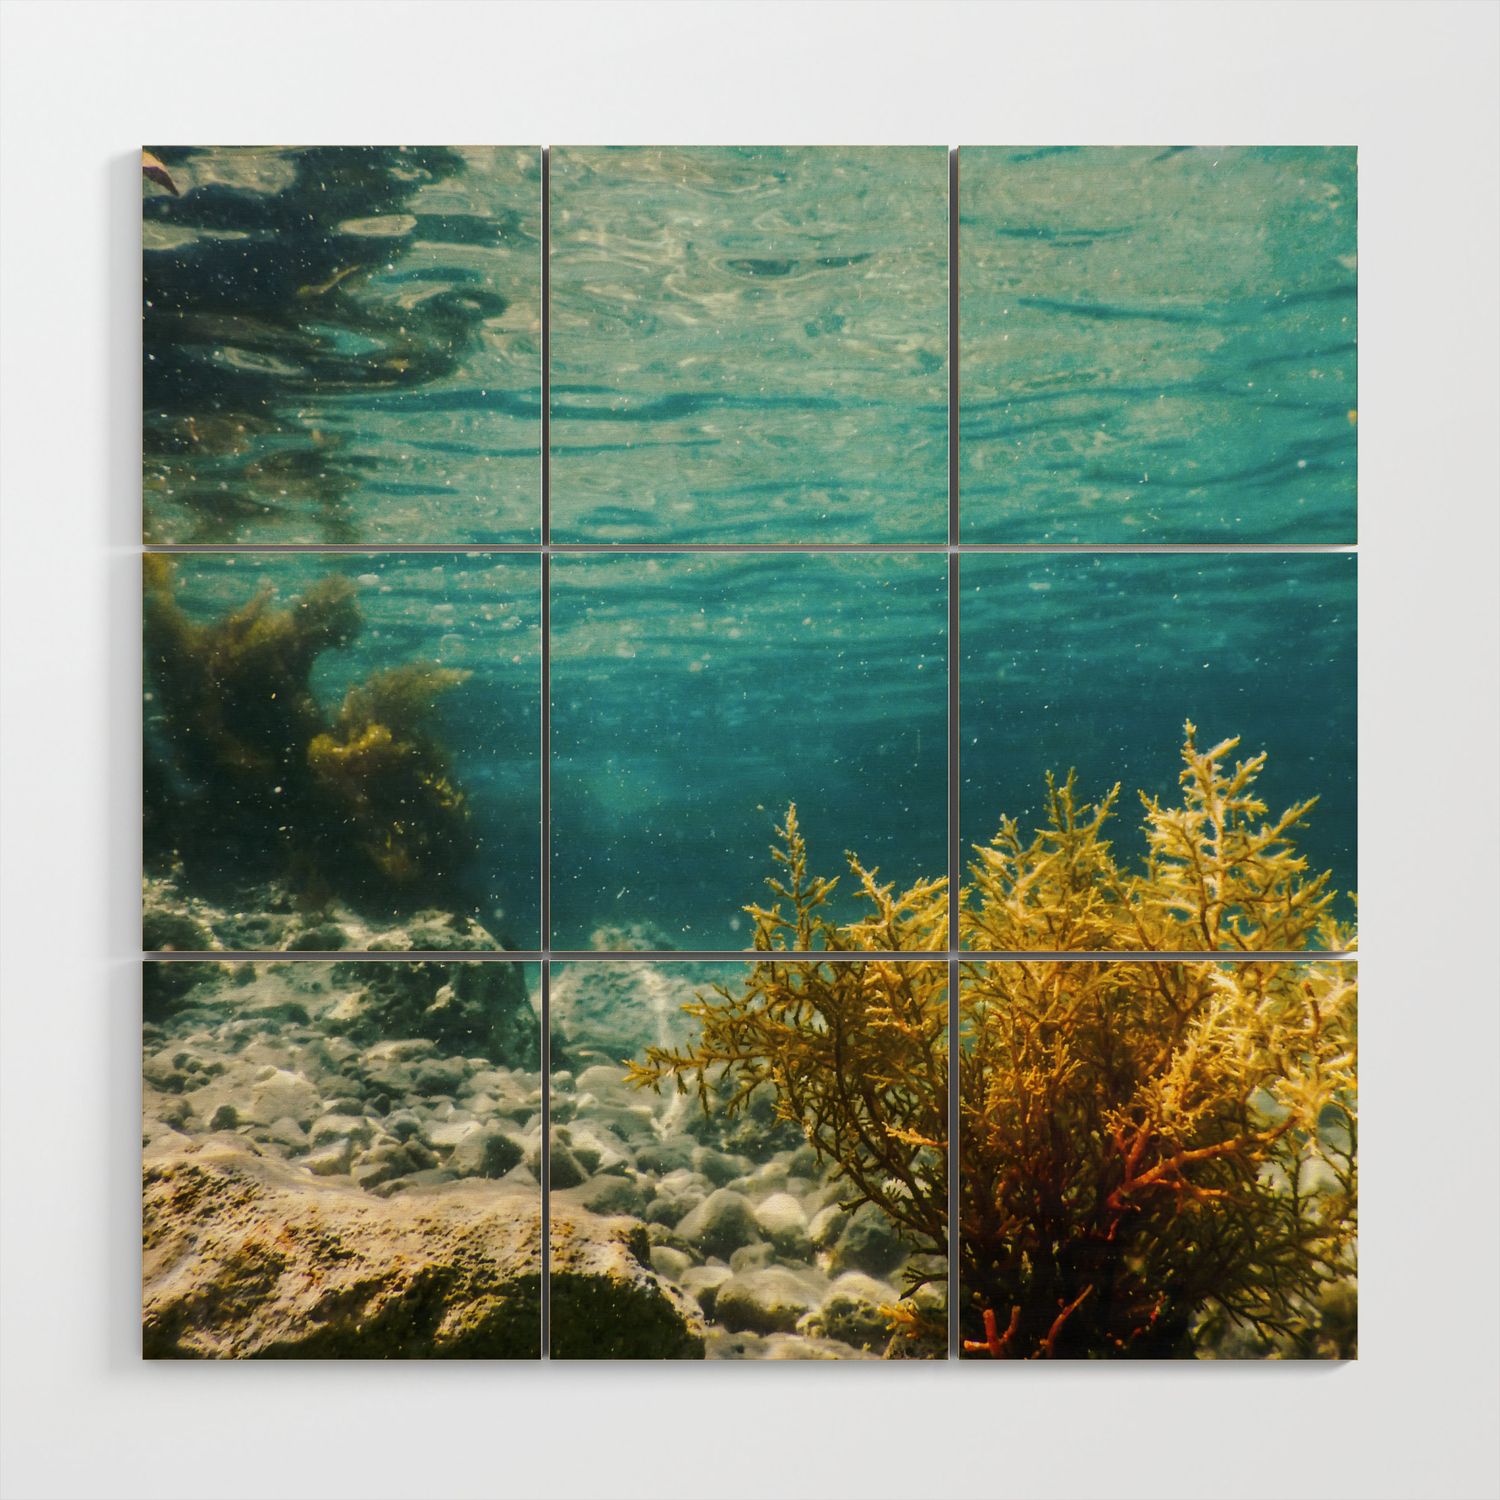 Forest Of Seaweed, Seaweed Underwater, Seaweed Shallow Water Near Surface Wood  Wall Artallexxandarx | Society6 Intended For Underwater Wood Wall Art (View 10 of 15)